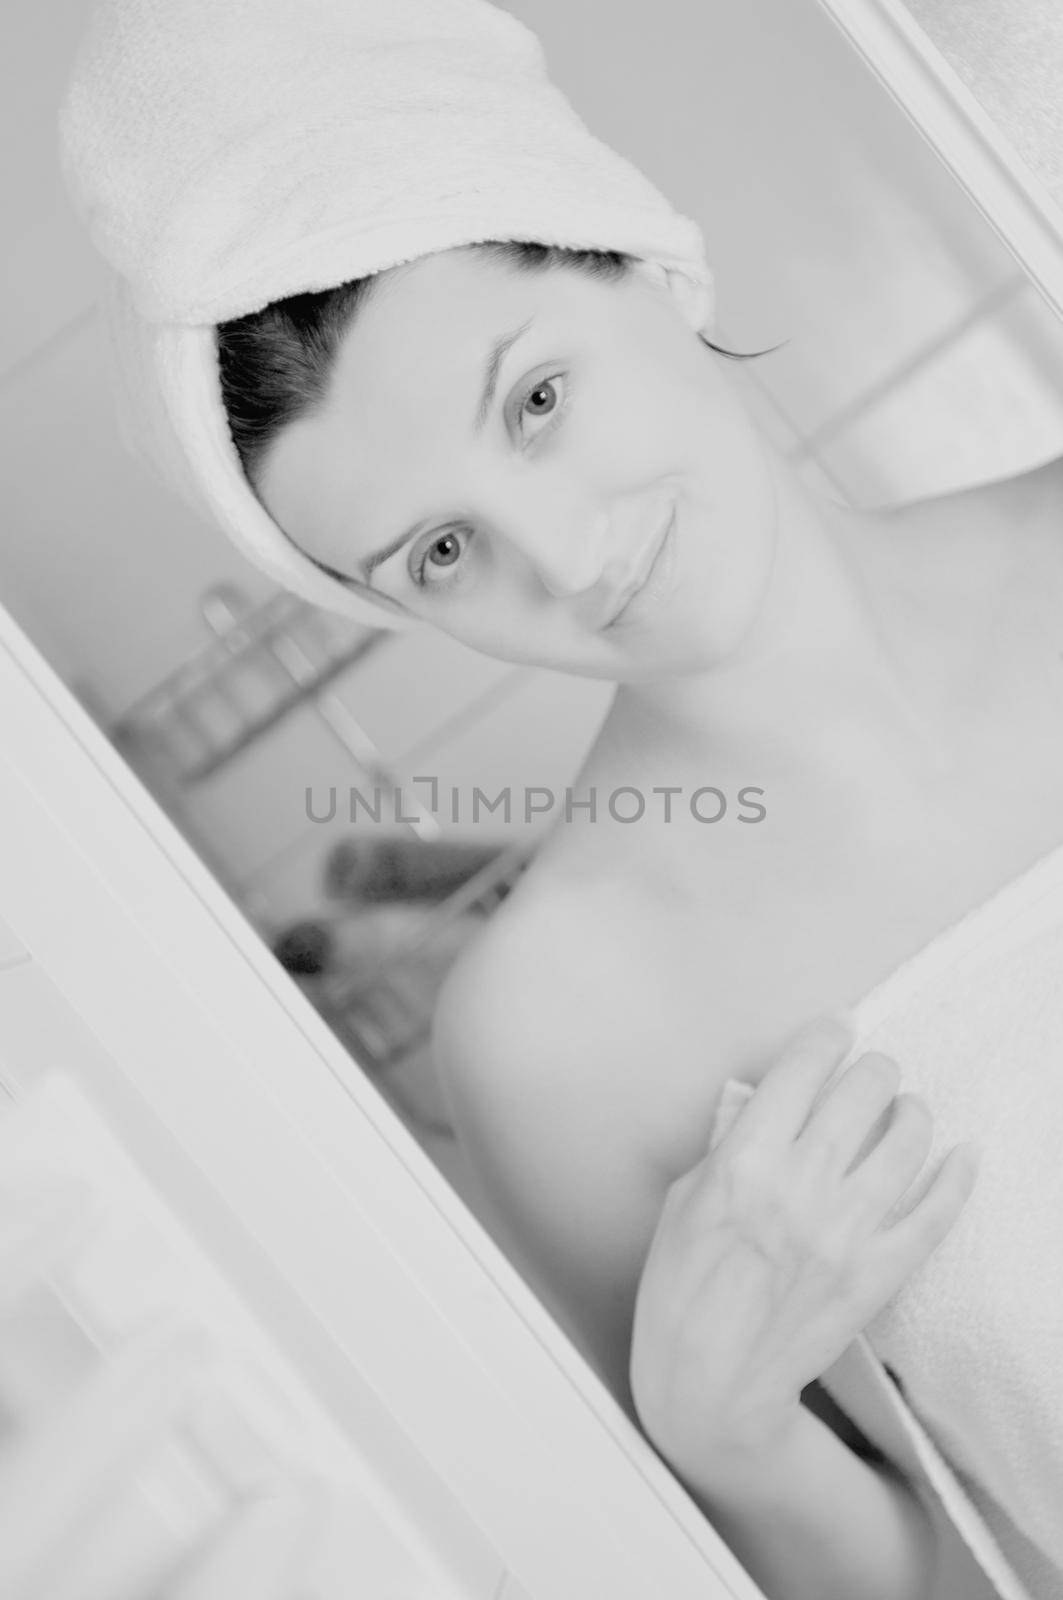 Young beautiful happy smiling tanned brunett woman at  shower in bathroom